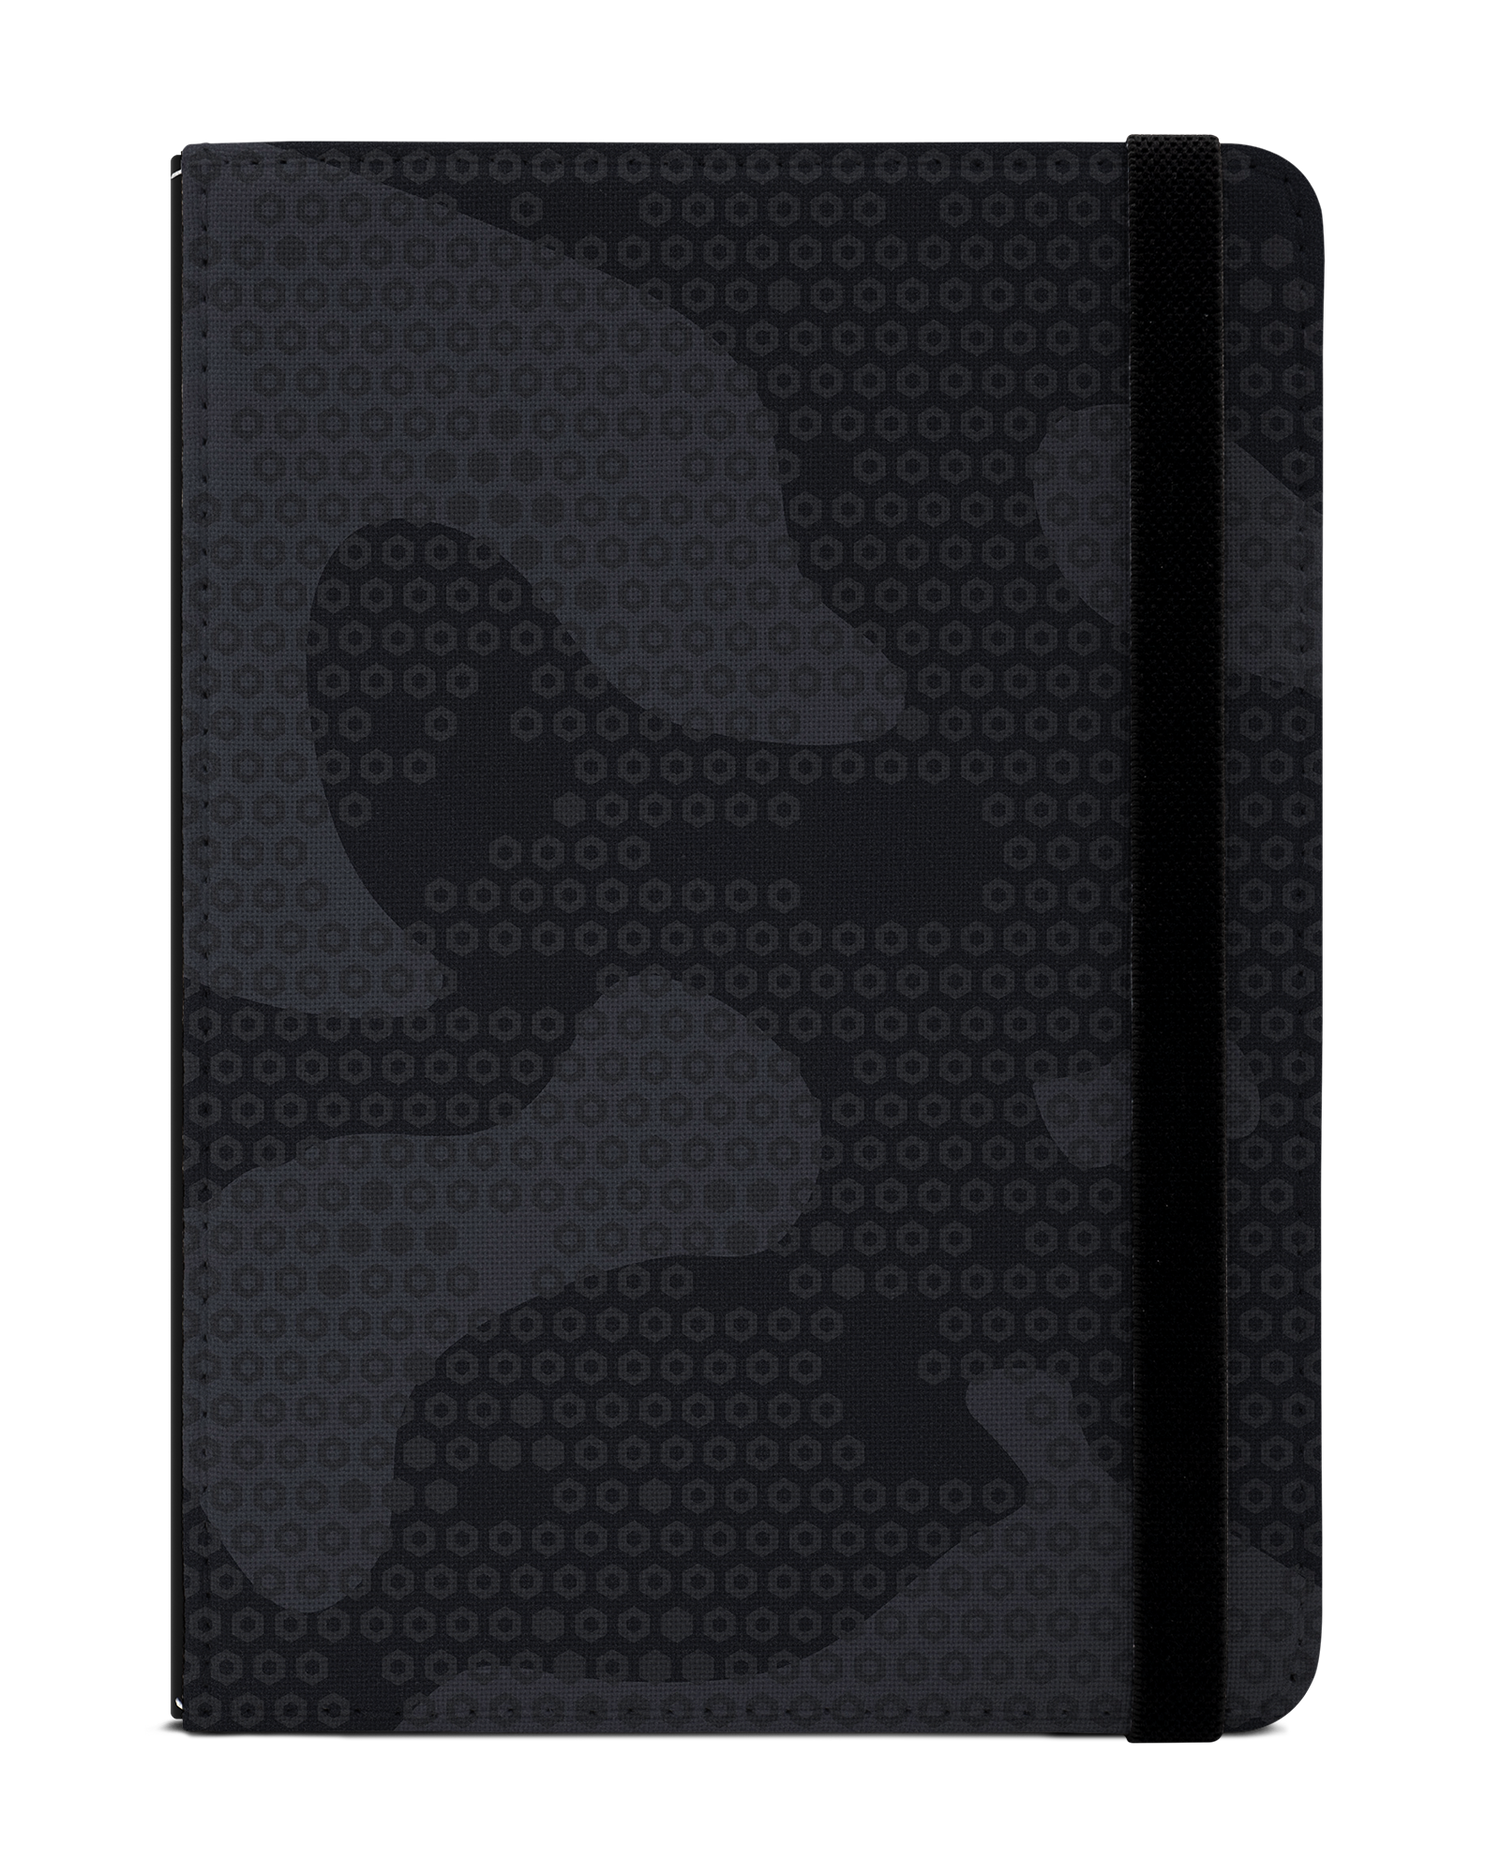 Spec Ops Dark eReader Case for tolino vision 1 to 4 HD: Front View